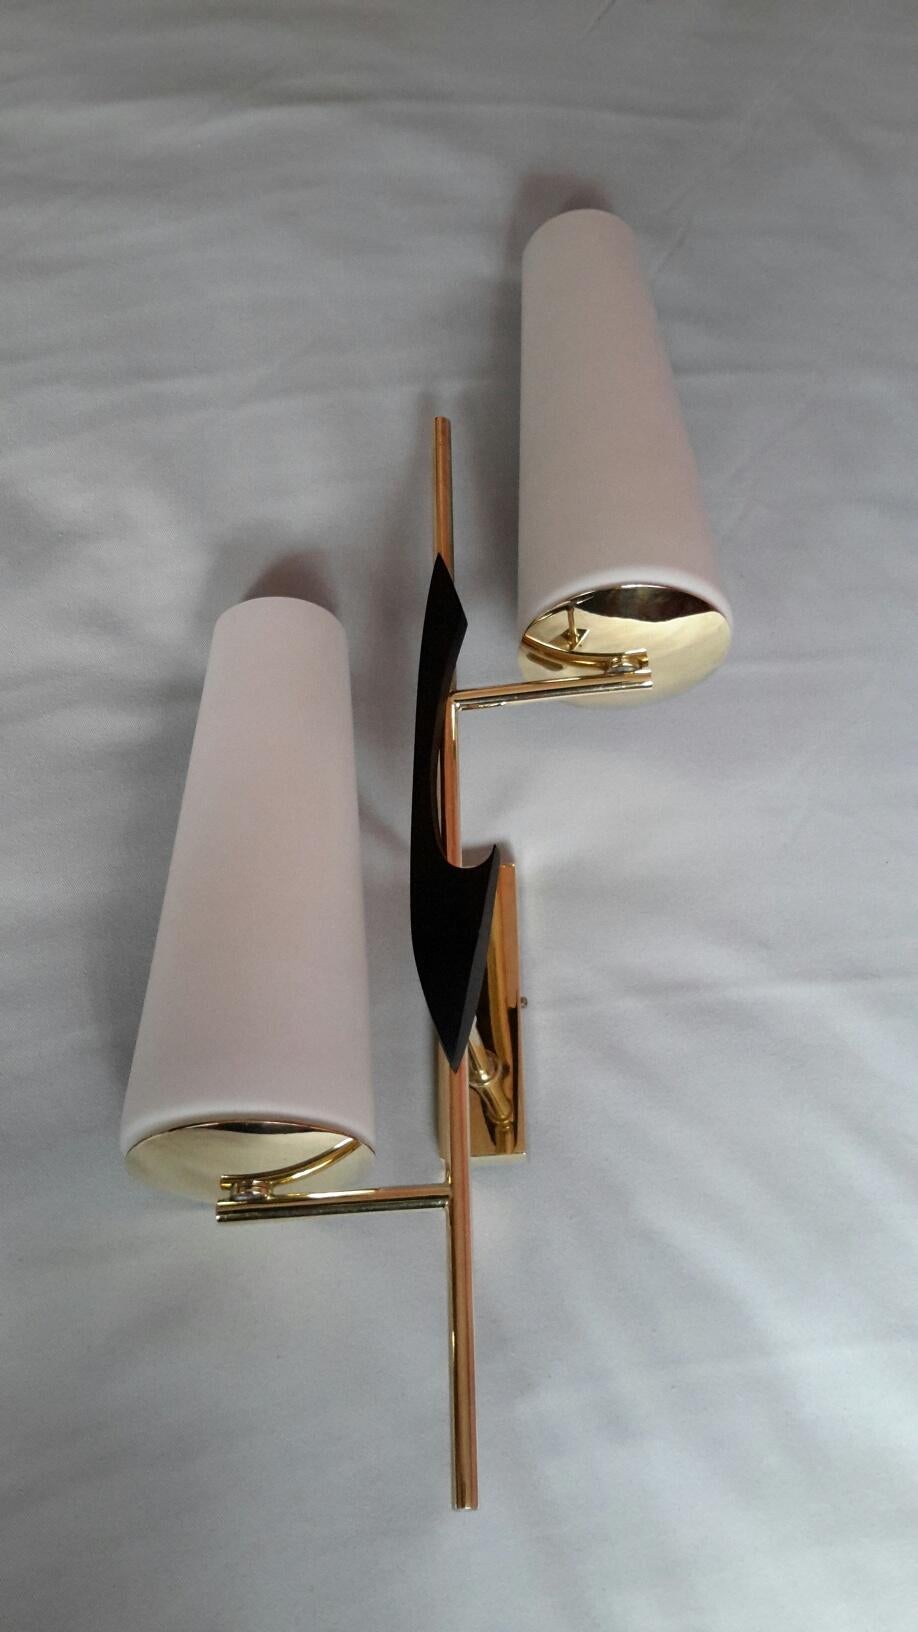 Gorgeous and large pair of asymmetrical double Mid-Century Modern sconces 1950s, by French Maison Lunel.
In brass, black stone element, and white satin opaline glasses.
The sconces are in superb condition, electric parts have been renewed